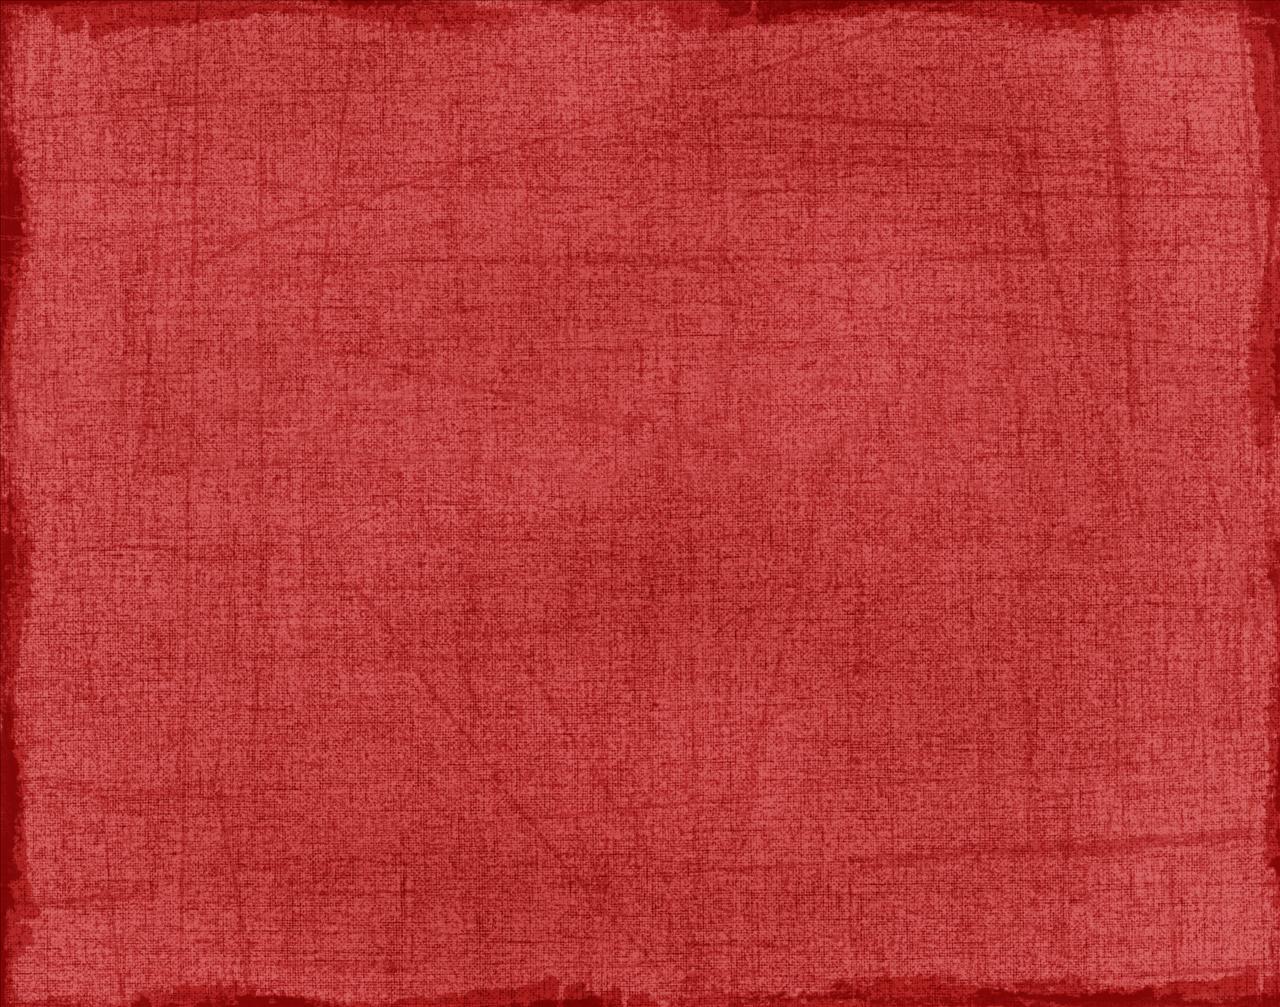 Red Vintage Background Group Picture Image By Tag